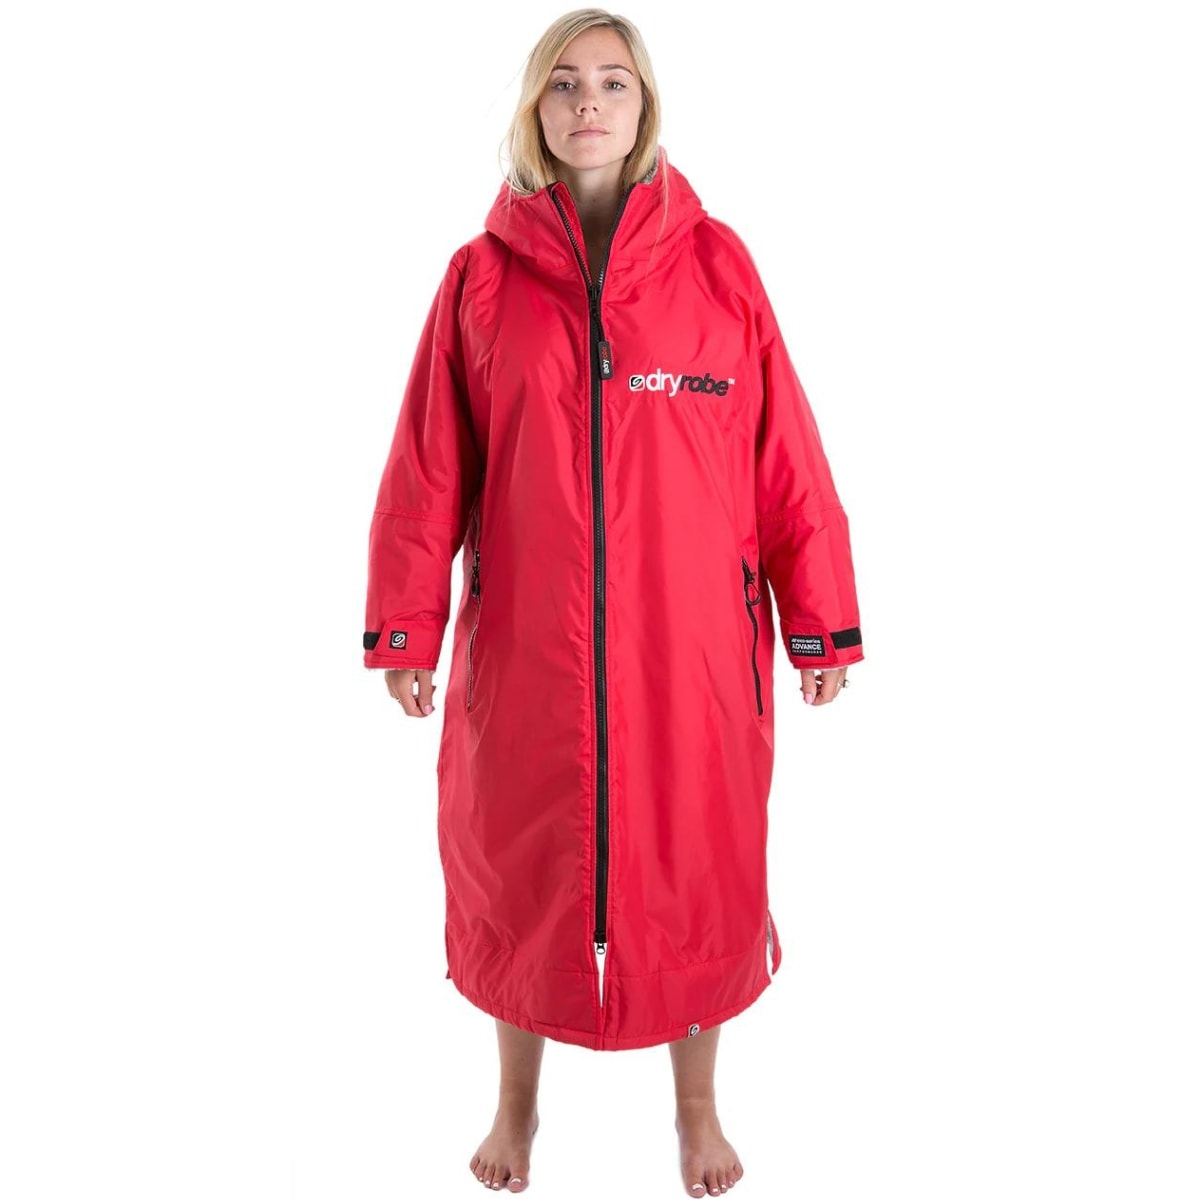 Dryrobe Advance Long Sleeve Drying &amp; Changing Robe - Red/Grey - Changing Robe Poncho Towel by Dryrobe